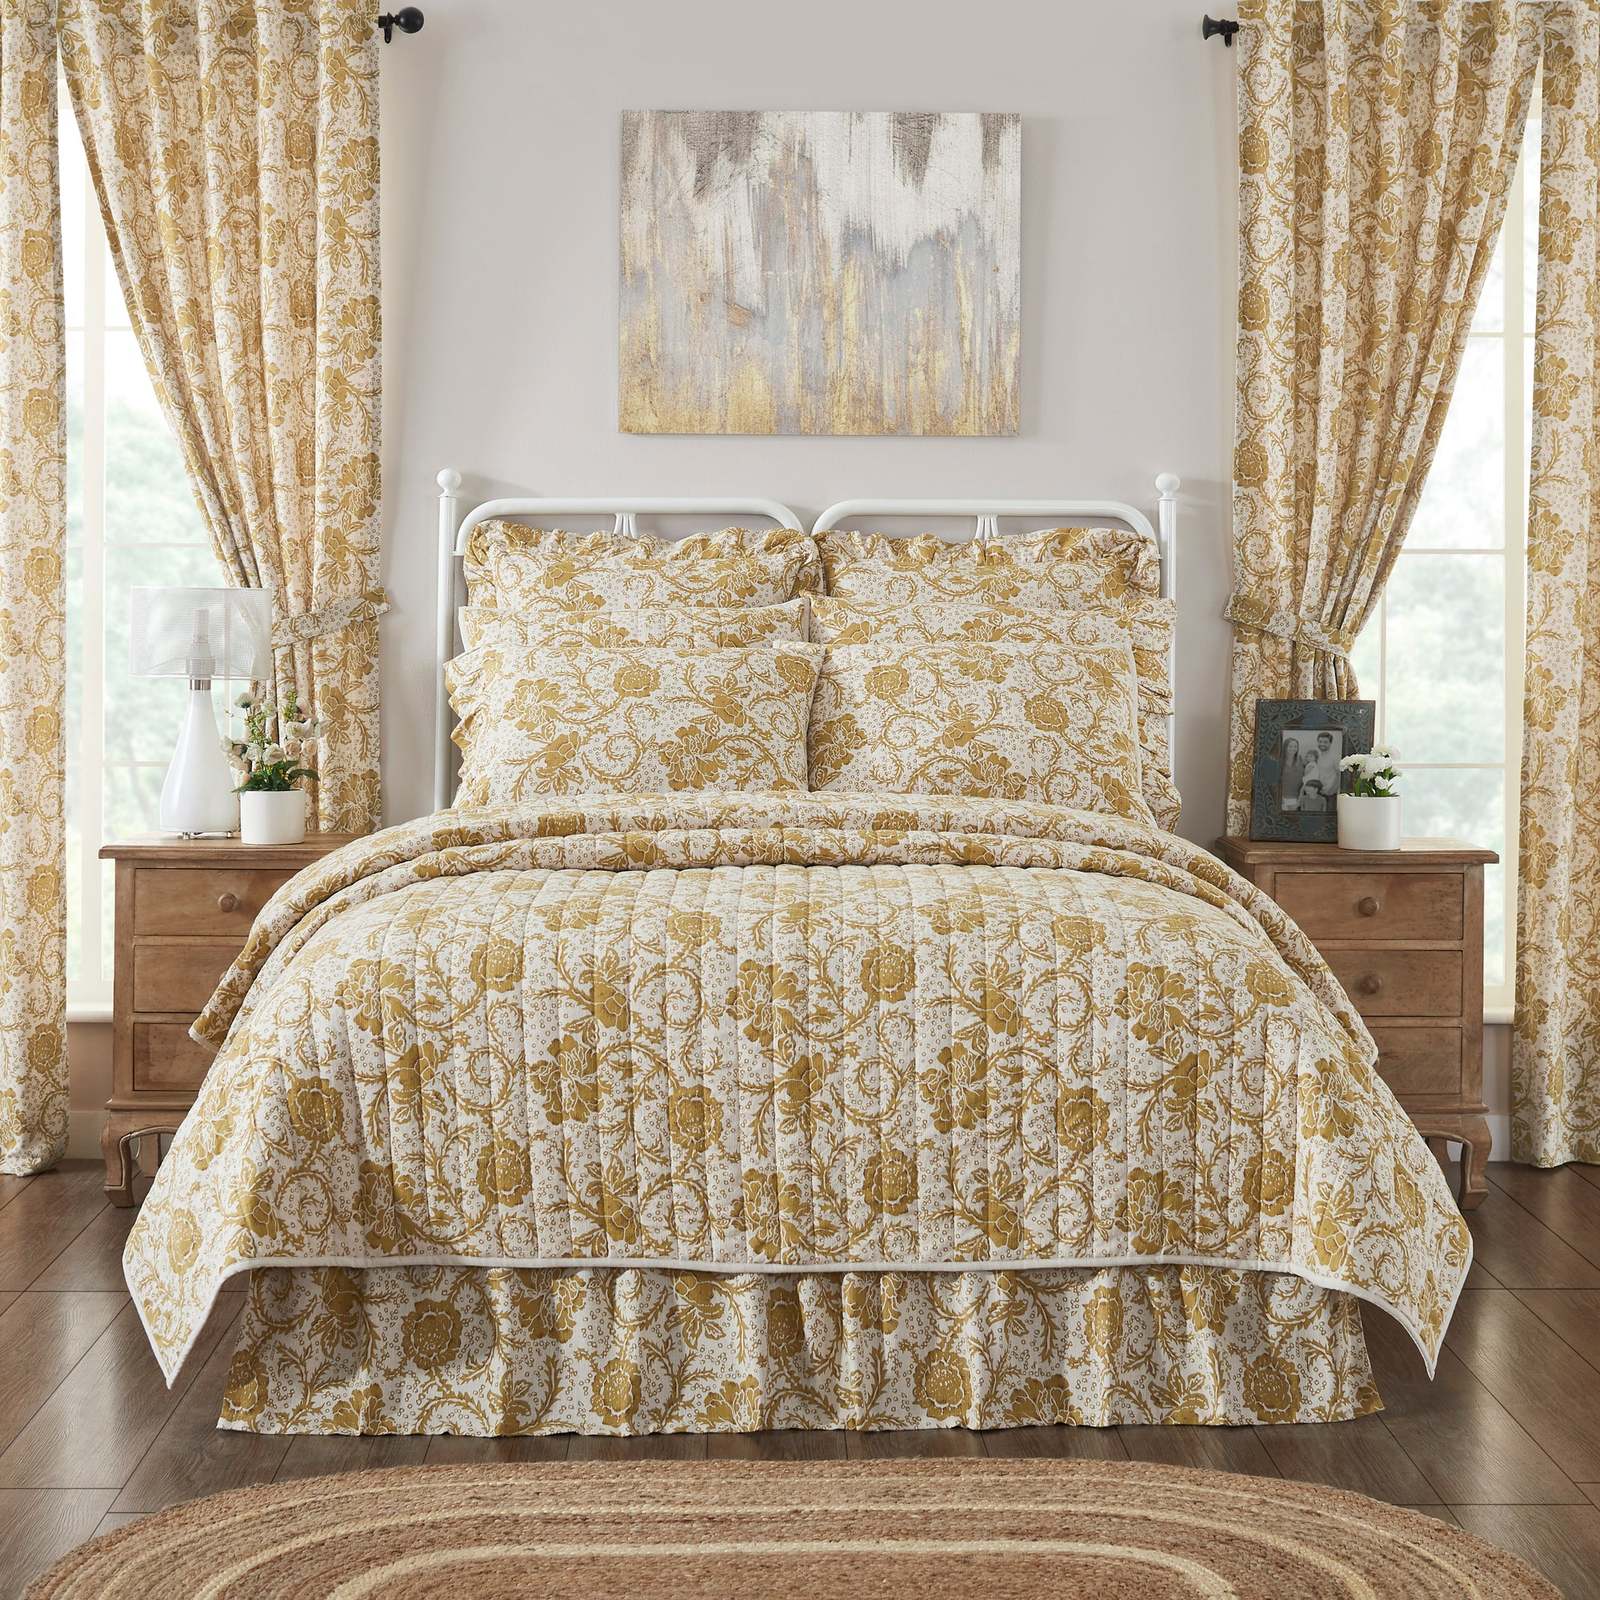 Dorset Gold Floral Luxury King Queen Twin Bedding Quilt Sale - $59.95